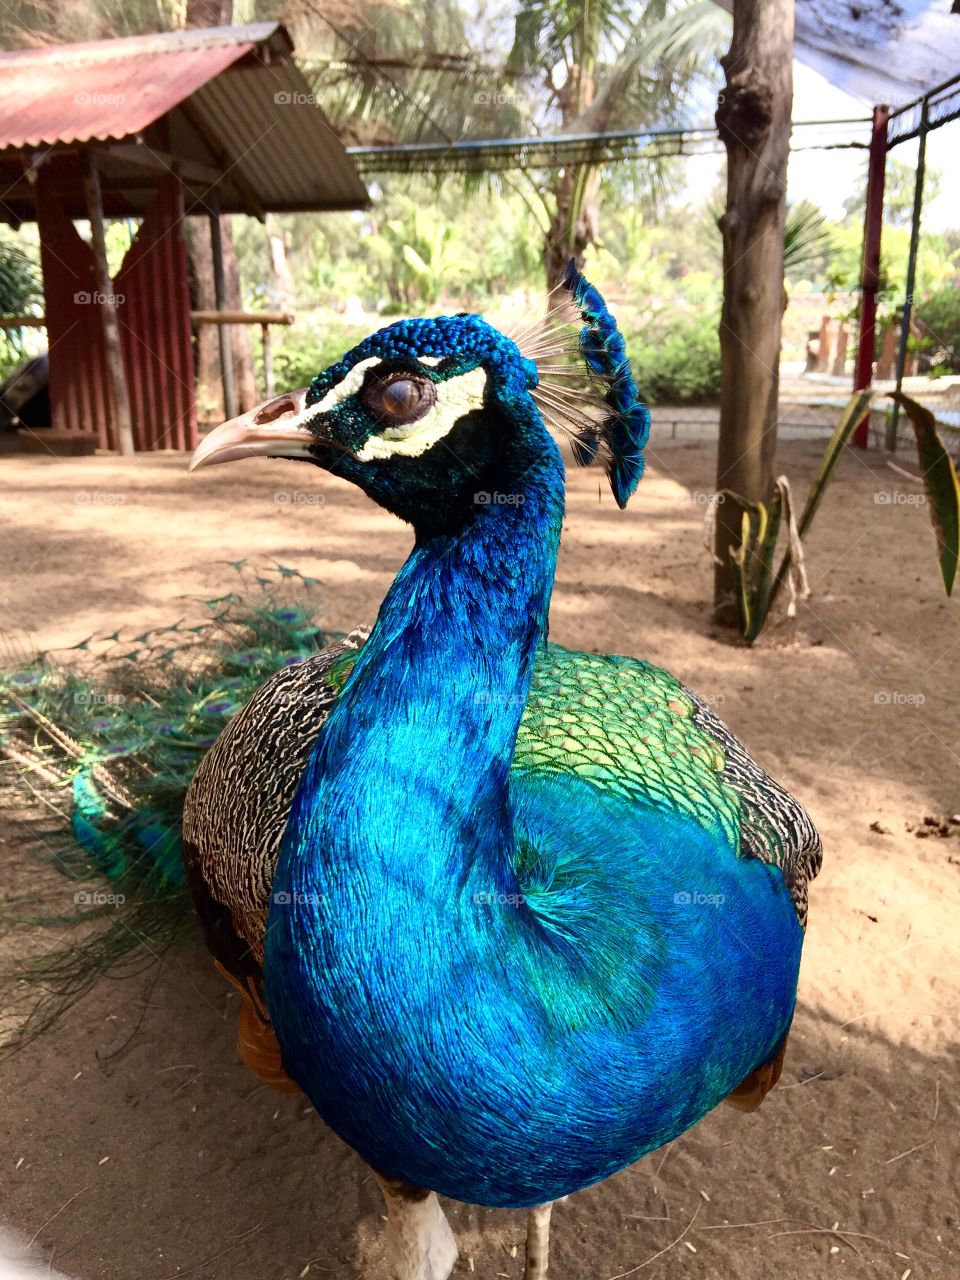 The beauty of a peacock is seen only when it spreads its feathers. However, it shines bright, still, with its feathers down. Its color radiates that it attracts anyone. This is a beautiful creation. 